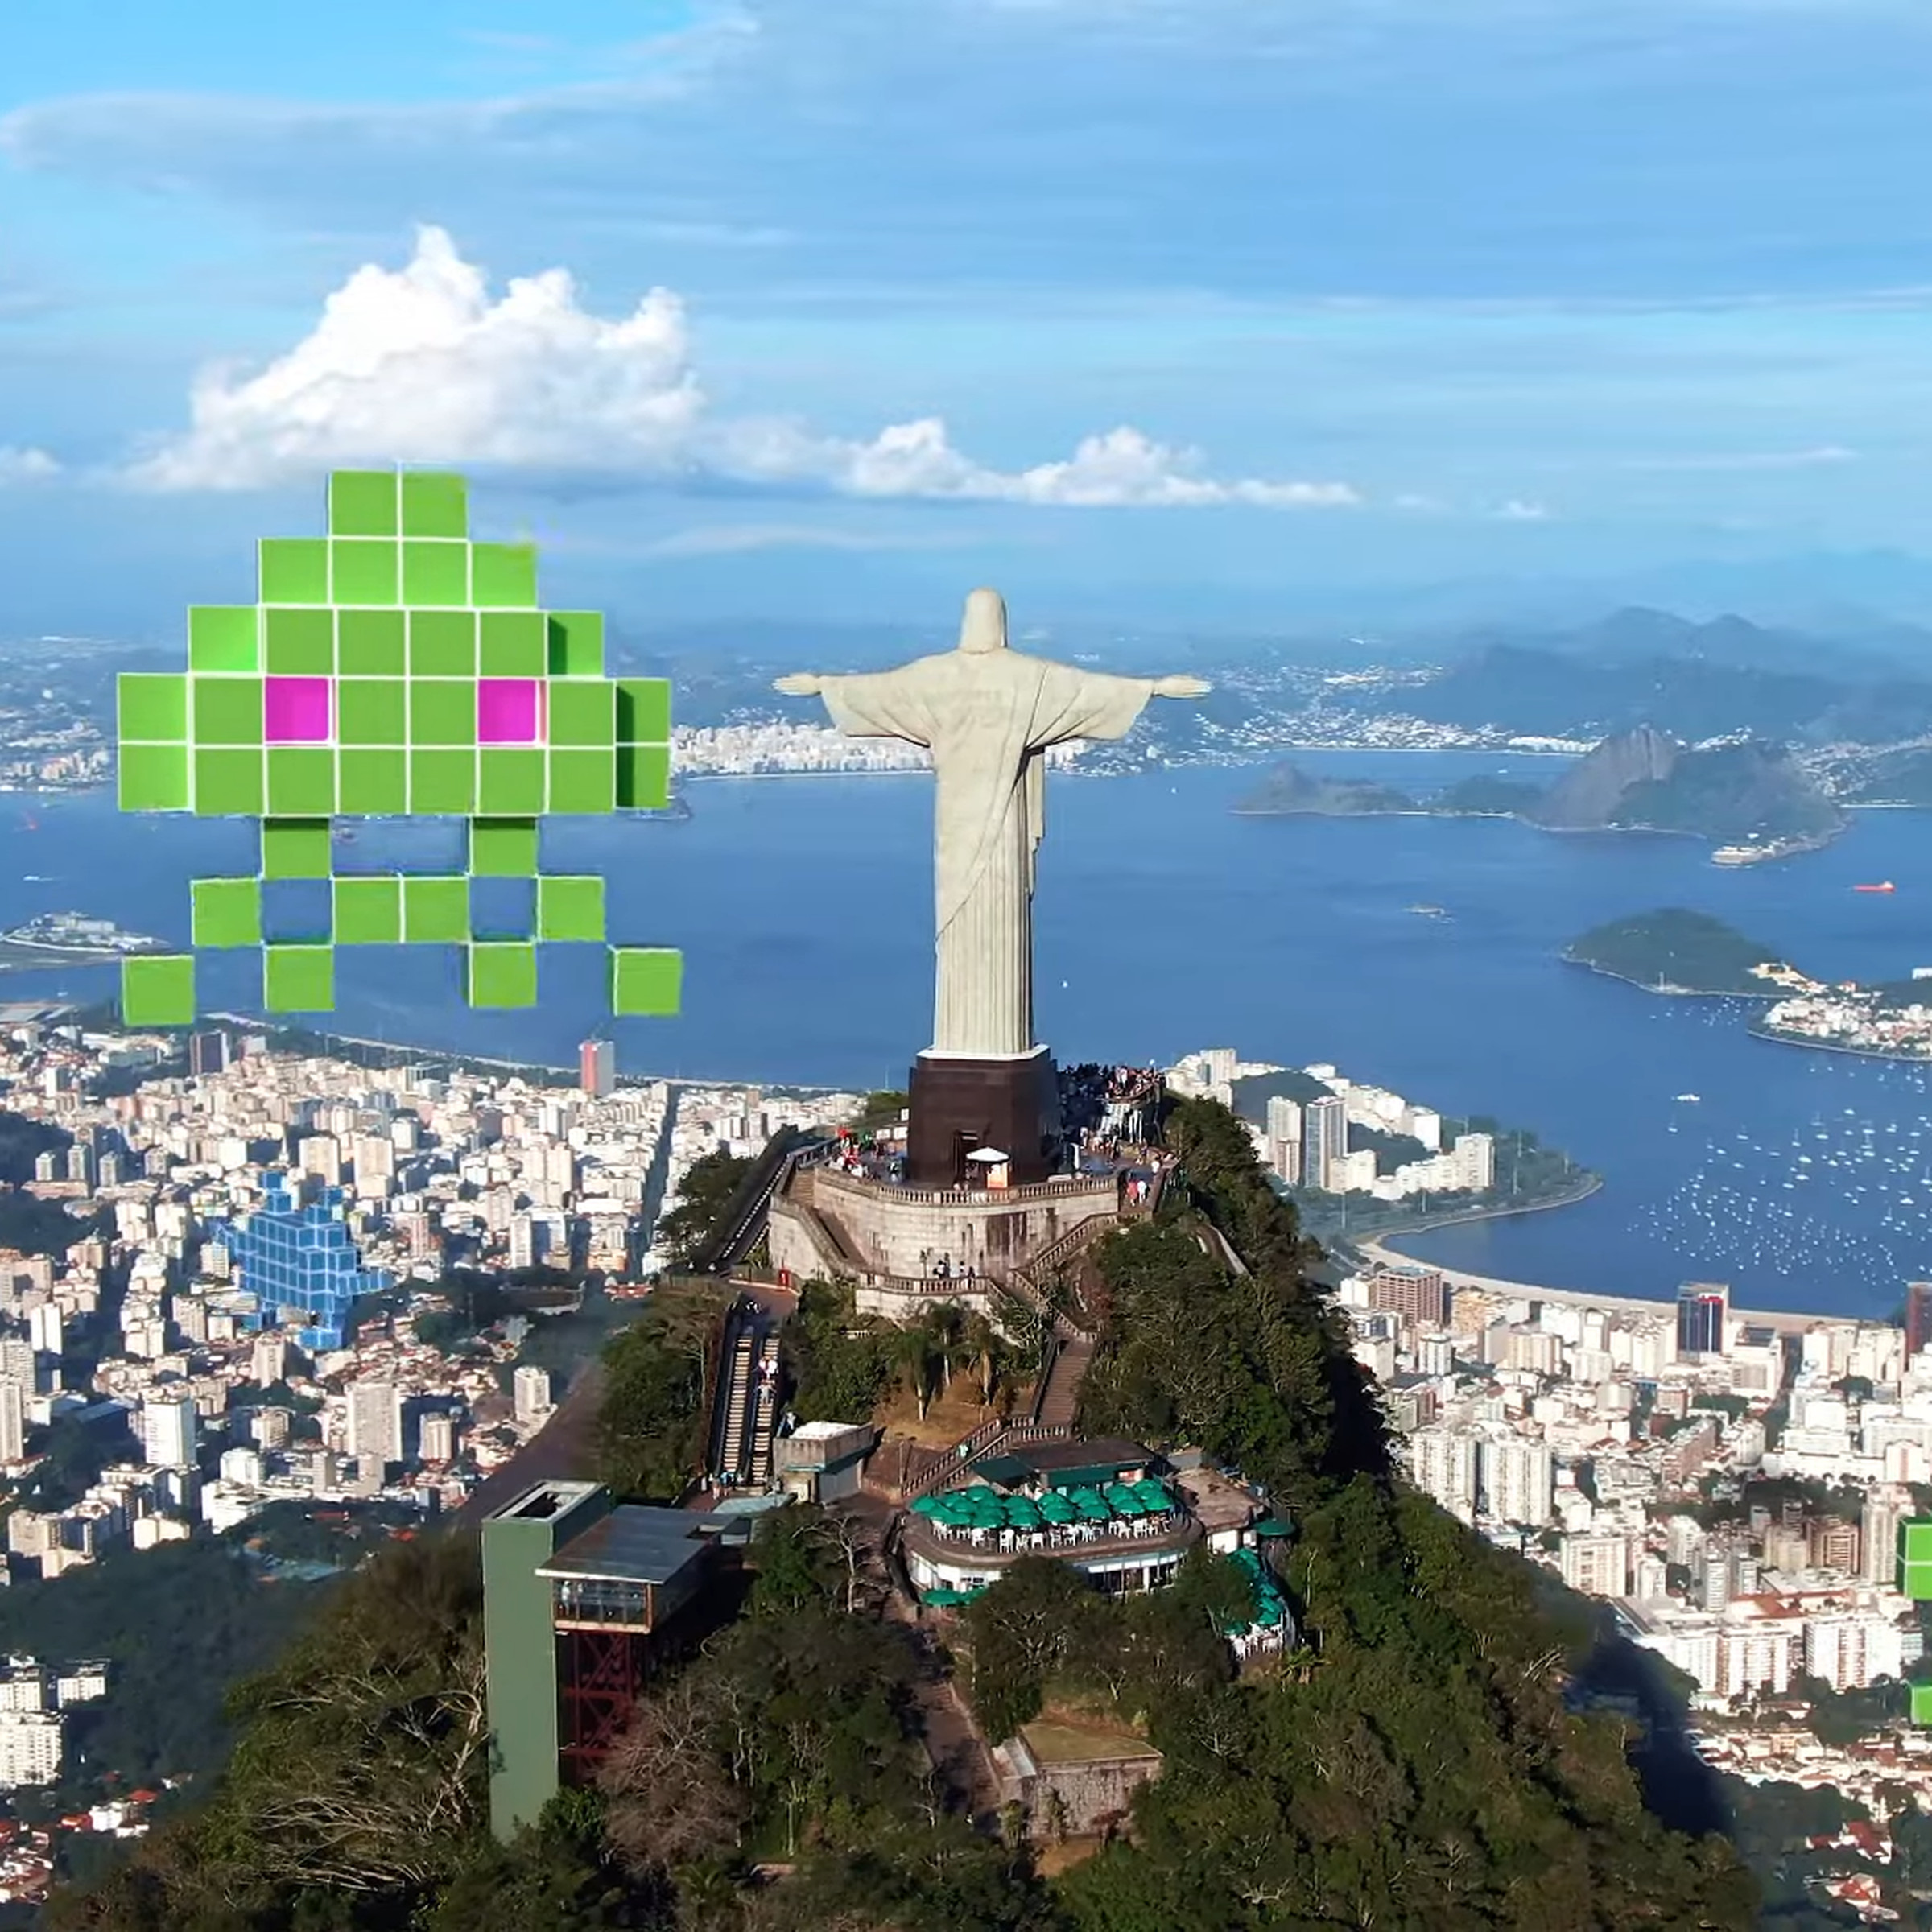 A photo of the Christ the Redeemer statue surrounded by virtual Space Invaders aliens.